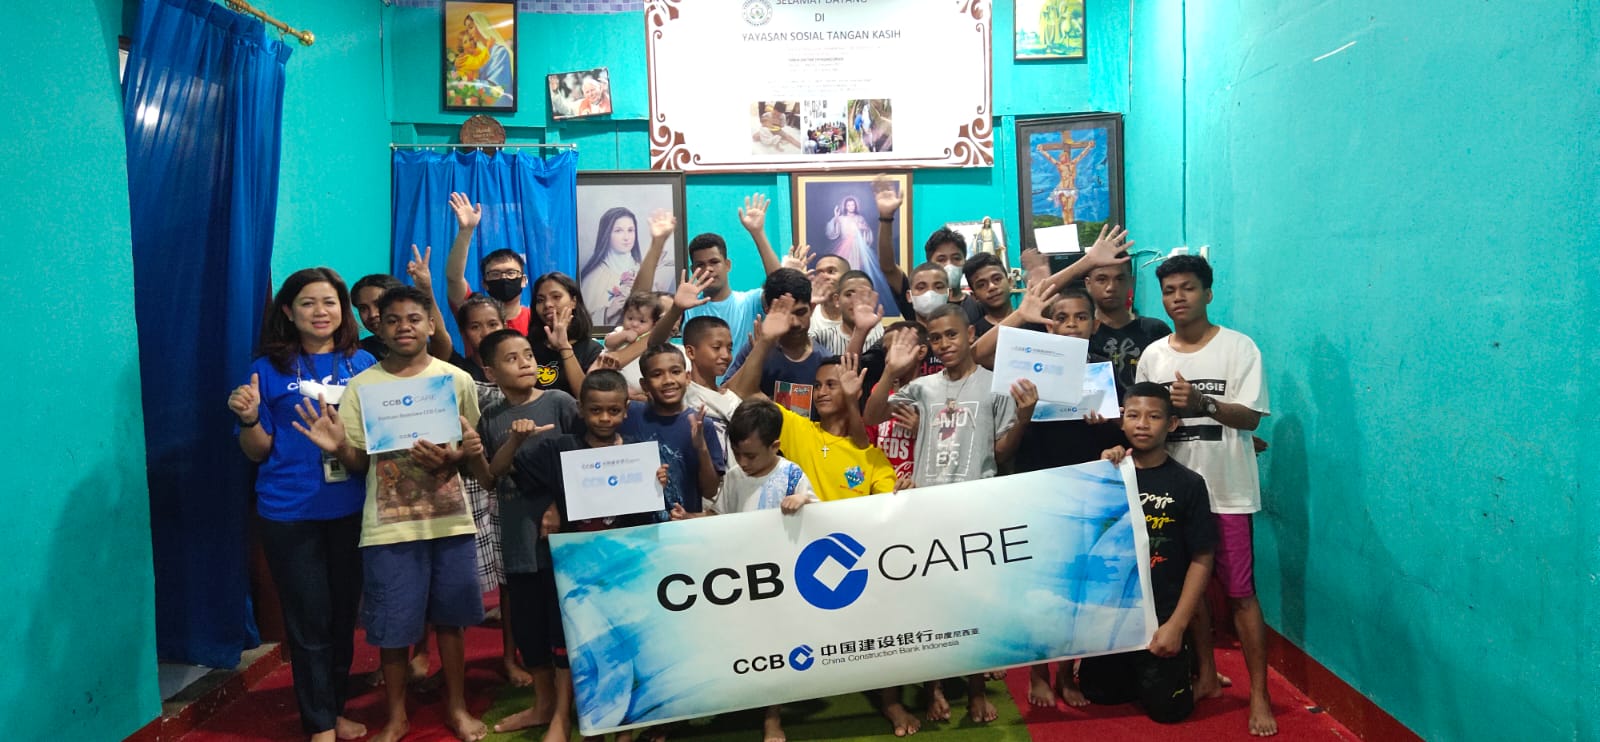 CCB Indonesia Care - Education Assistance for Orphanage of Tangan Kasih